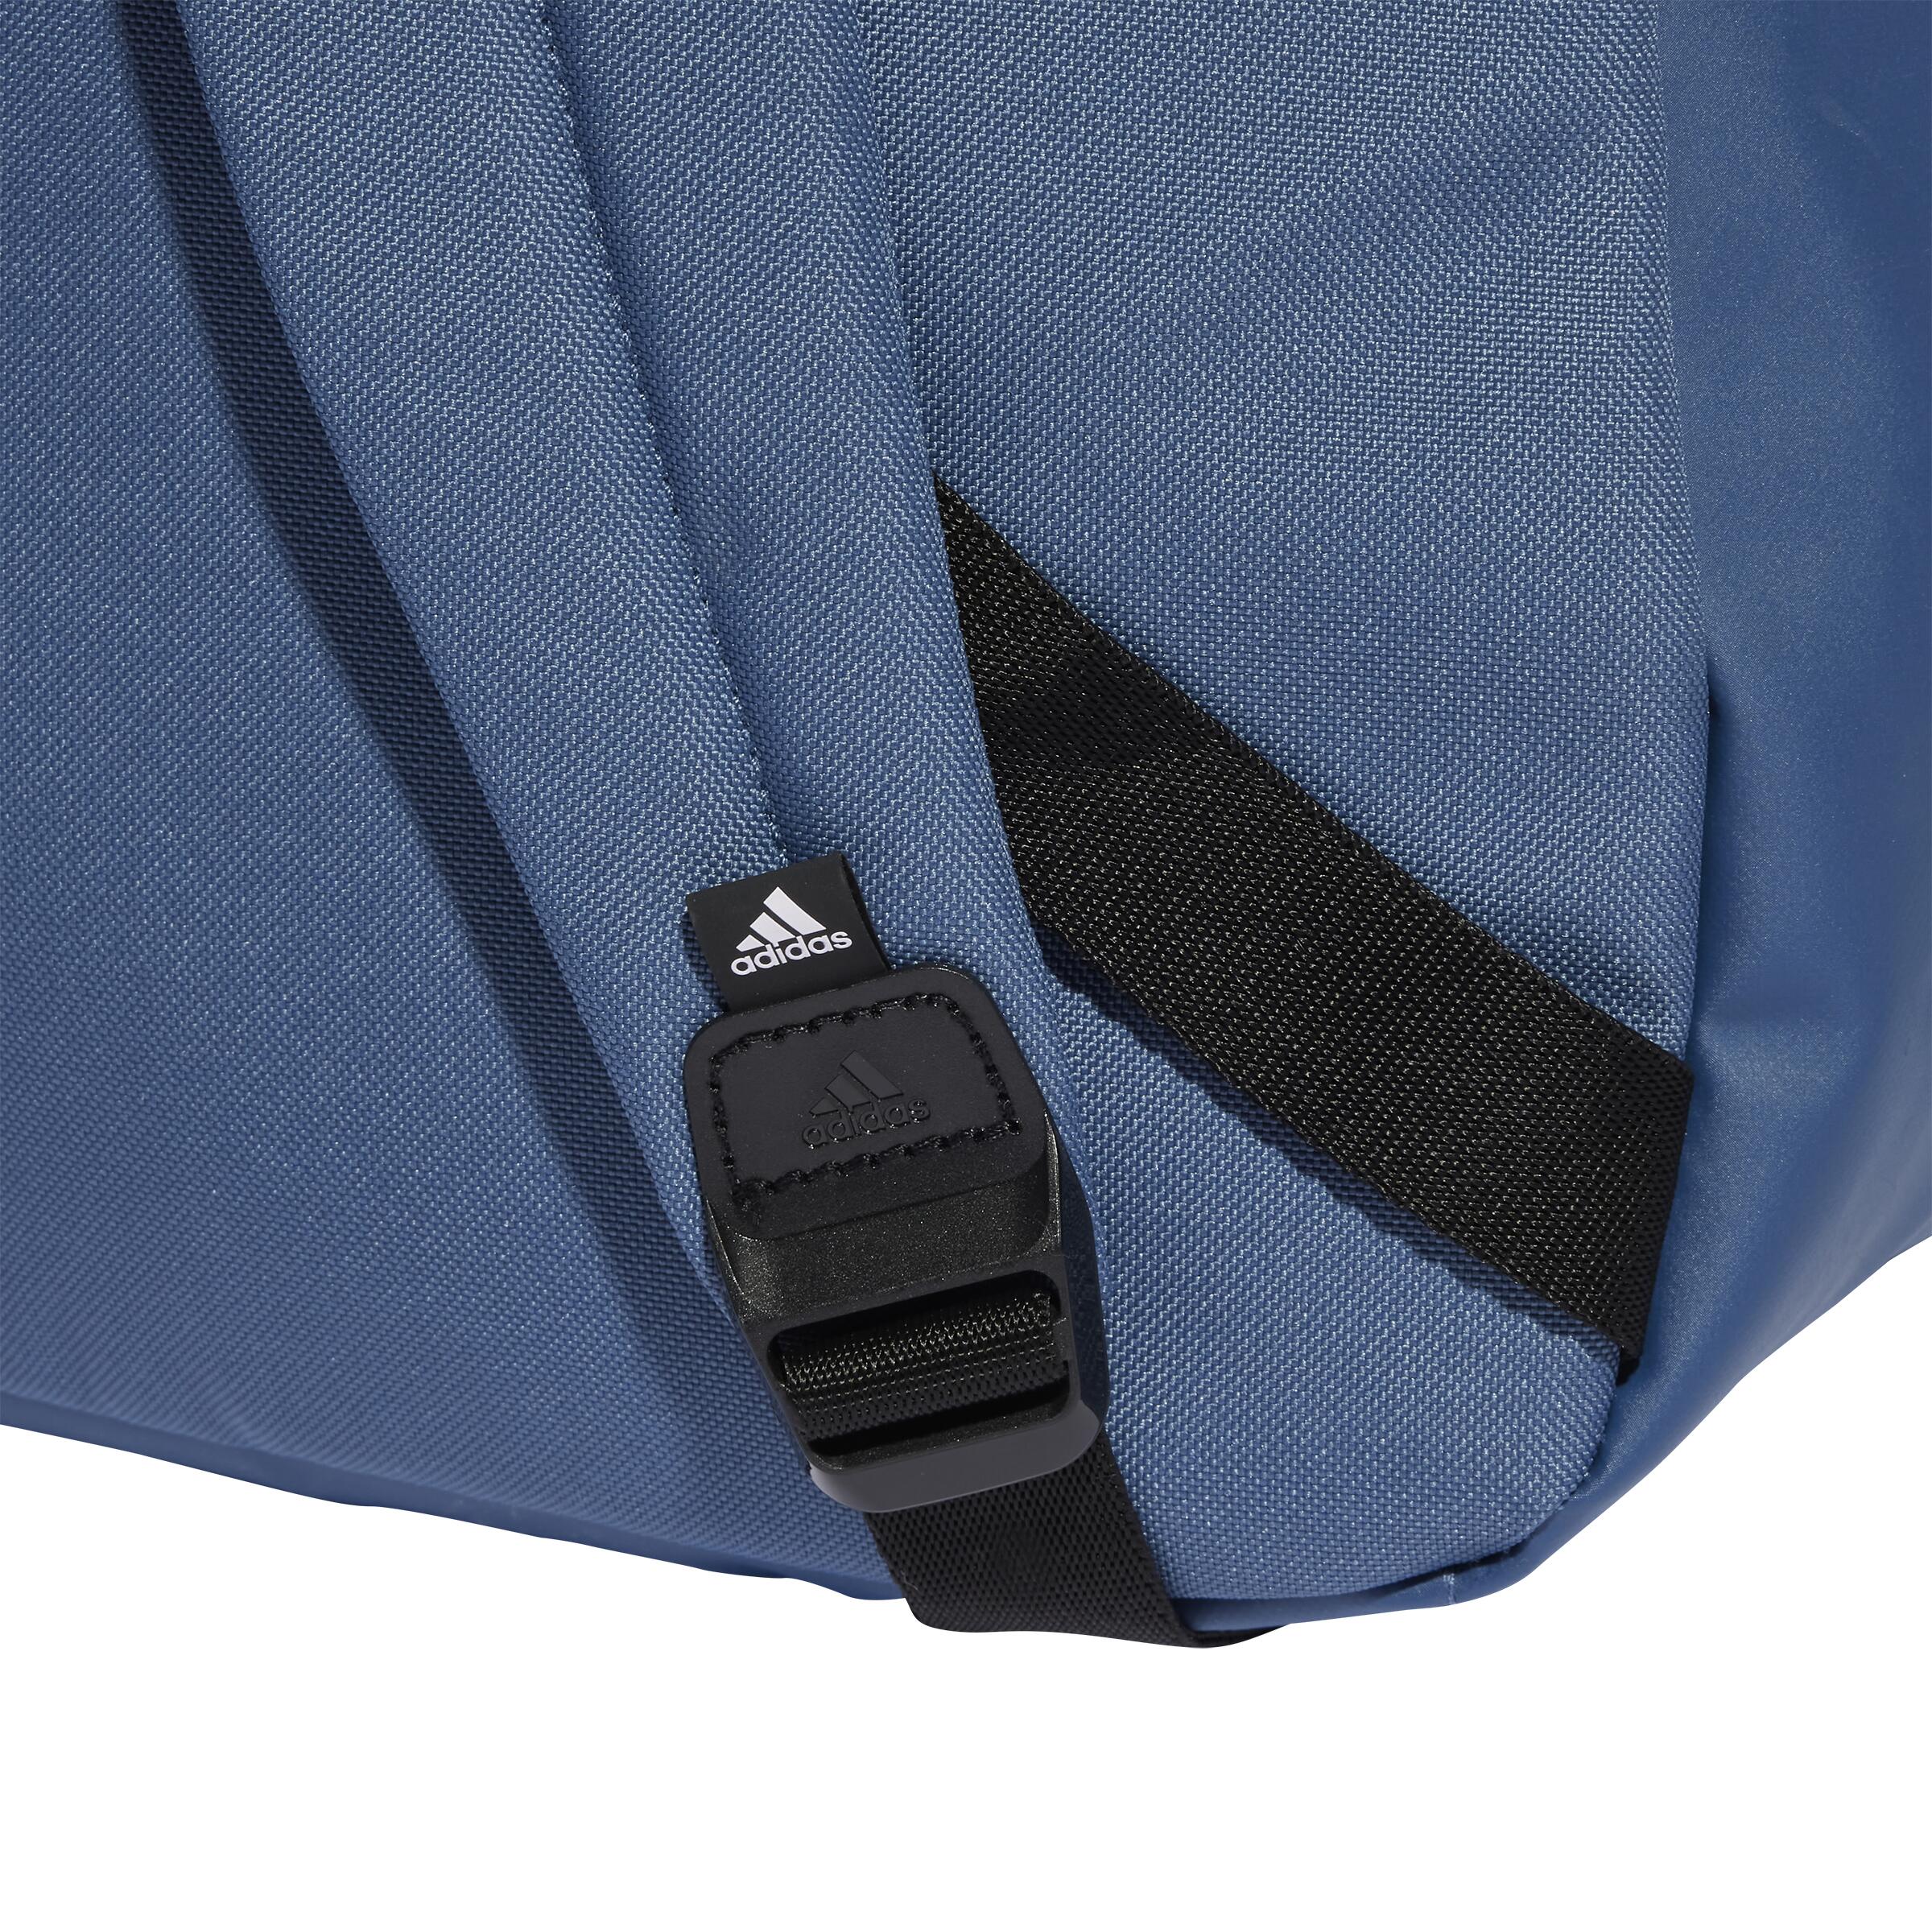 Backpack Classic Badge of Sport - Blue 6/6